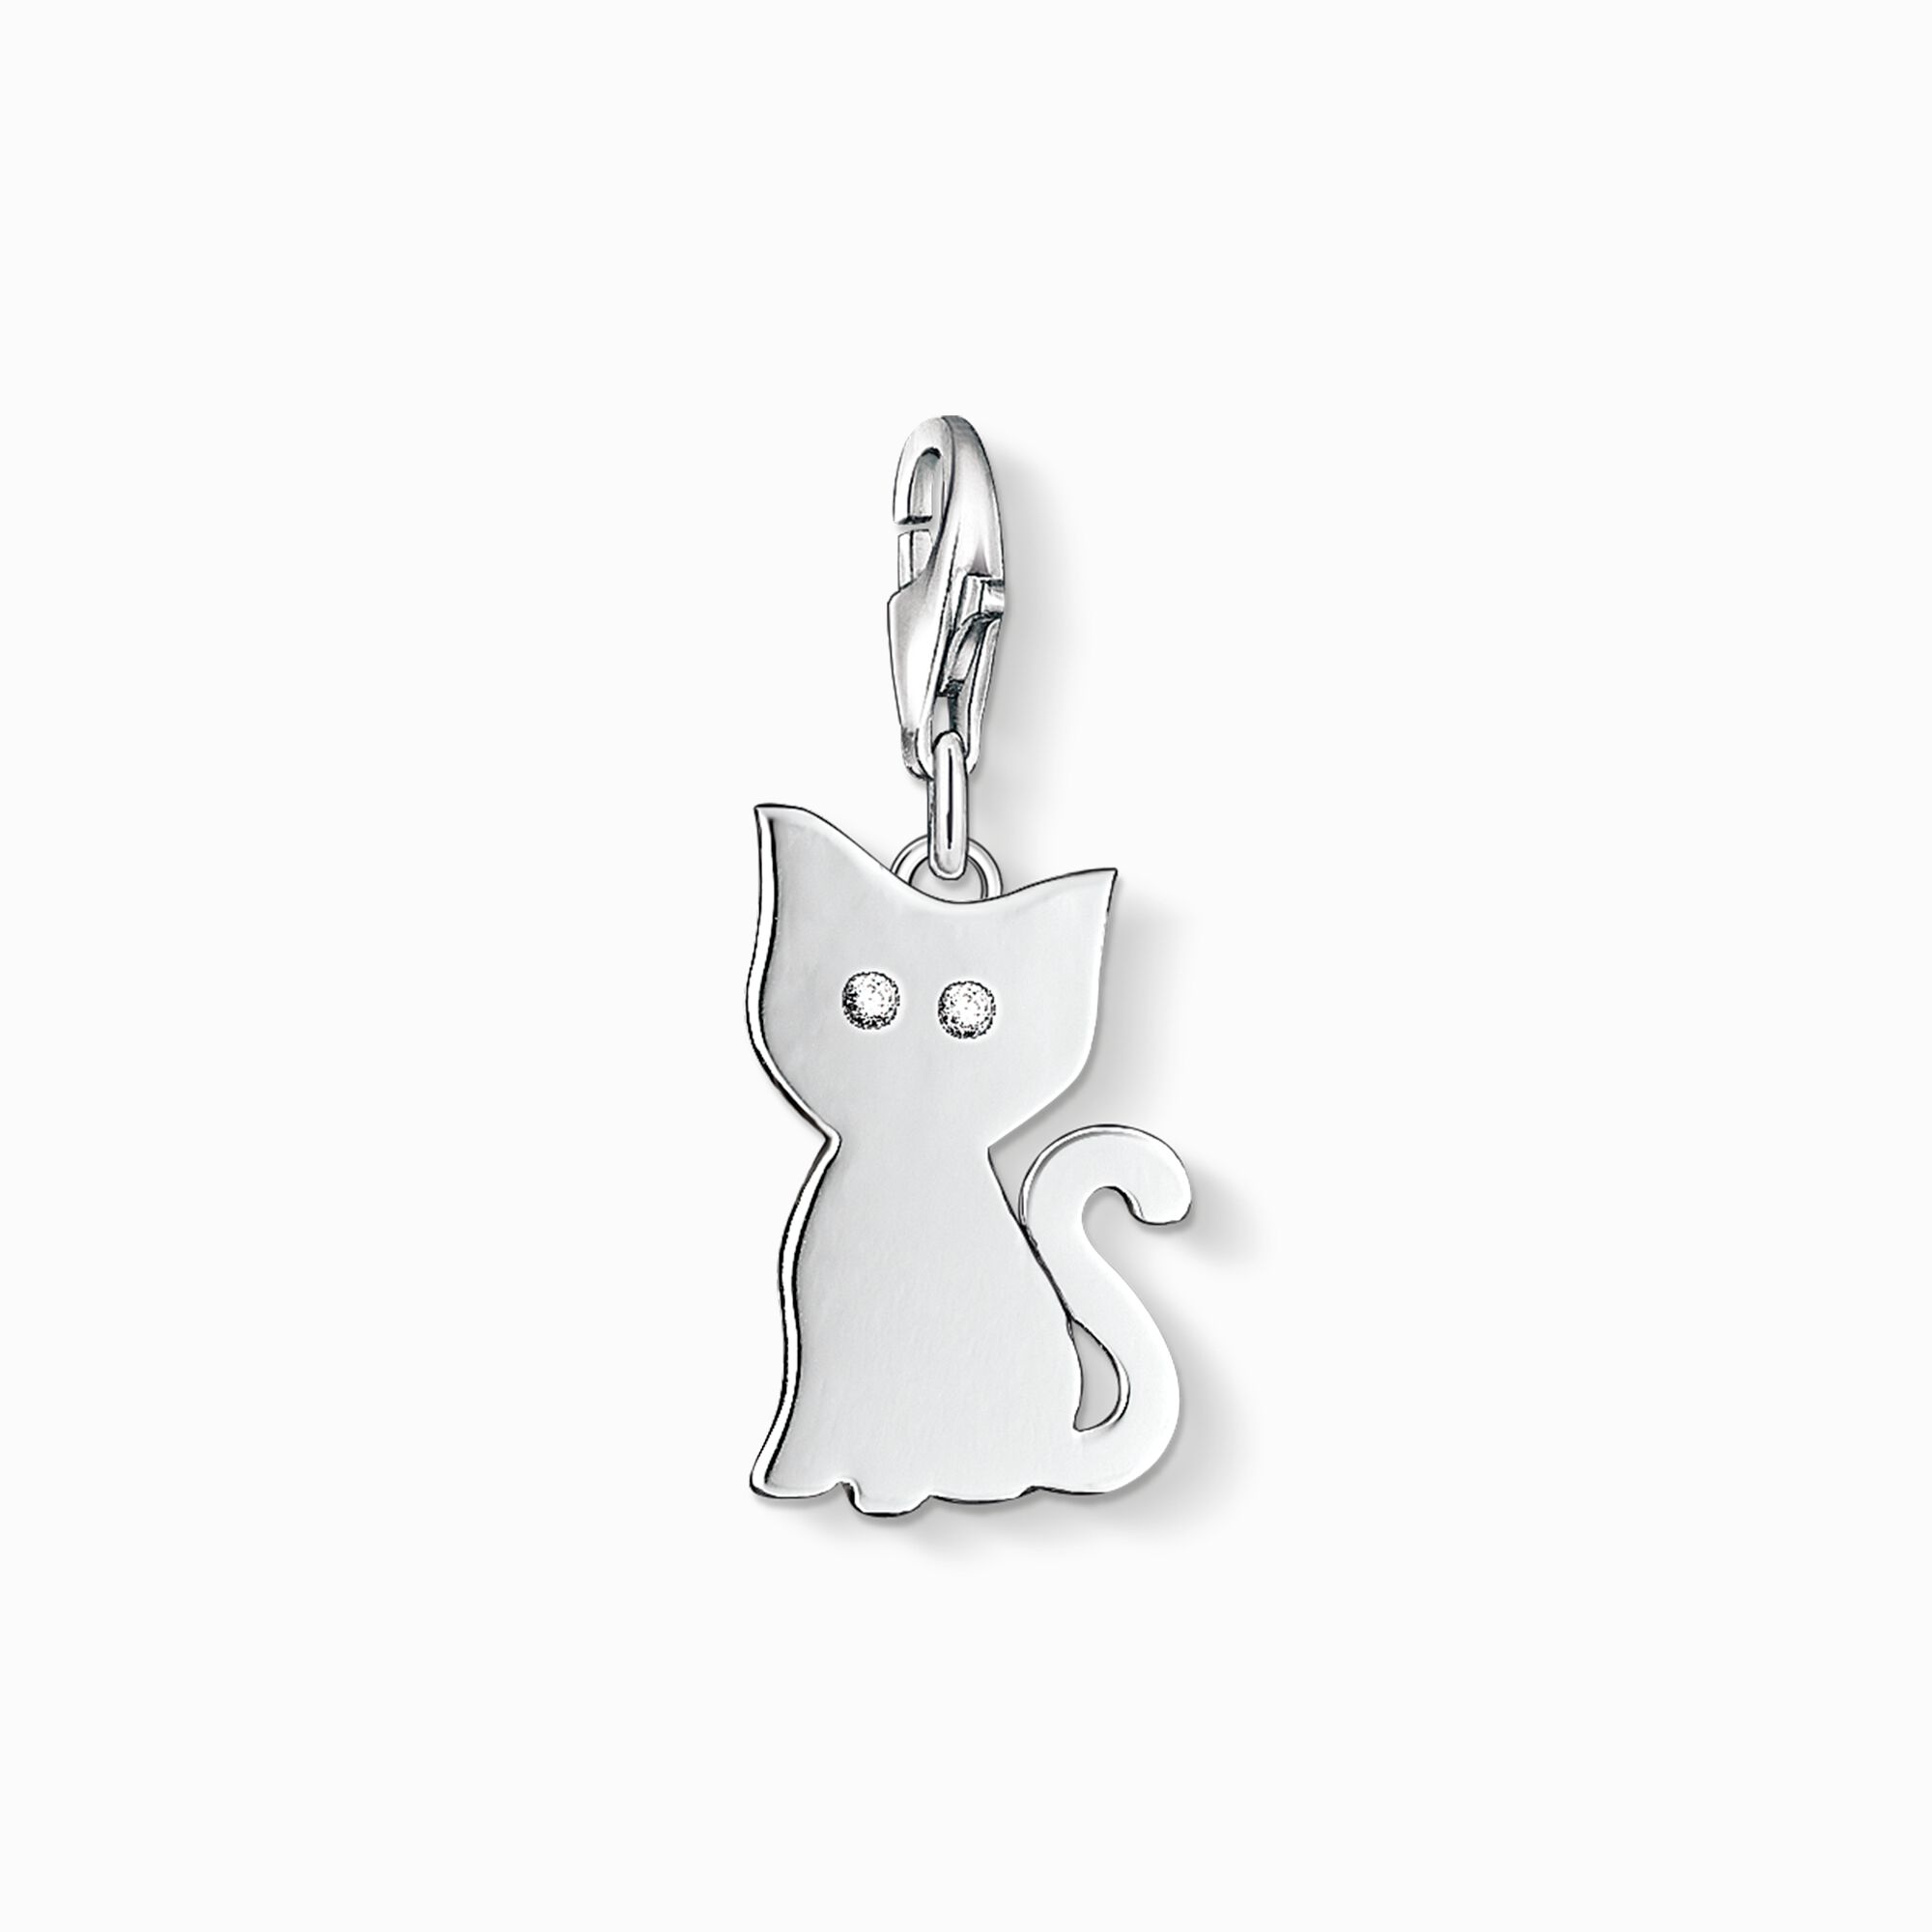 Charm pendant cat from the Charm Club collection in the THOMAS SABO online store